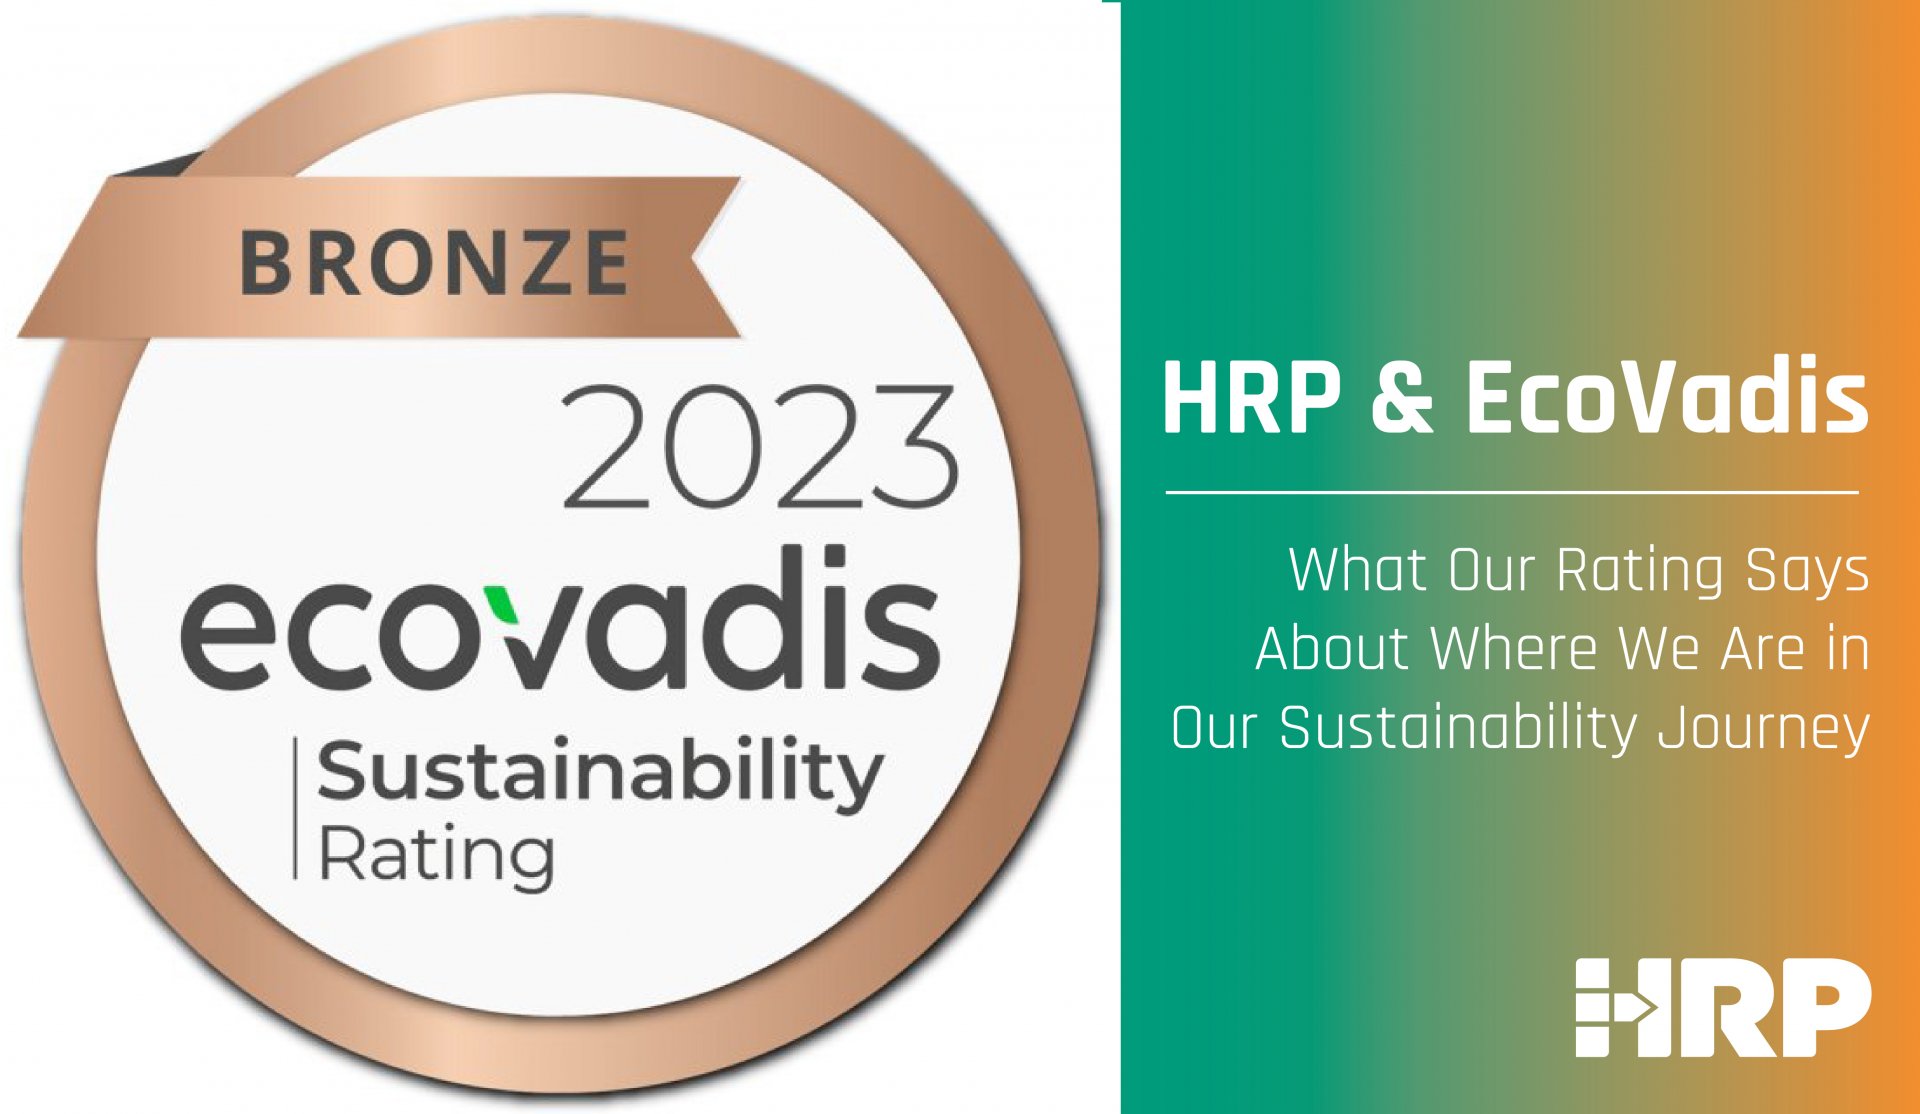 HRP and EcoVadis: What Our Rating Says About Where We Are in Our Sustainability Journey